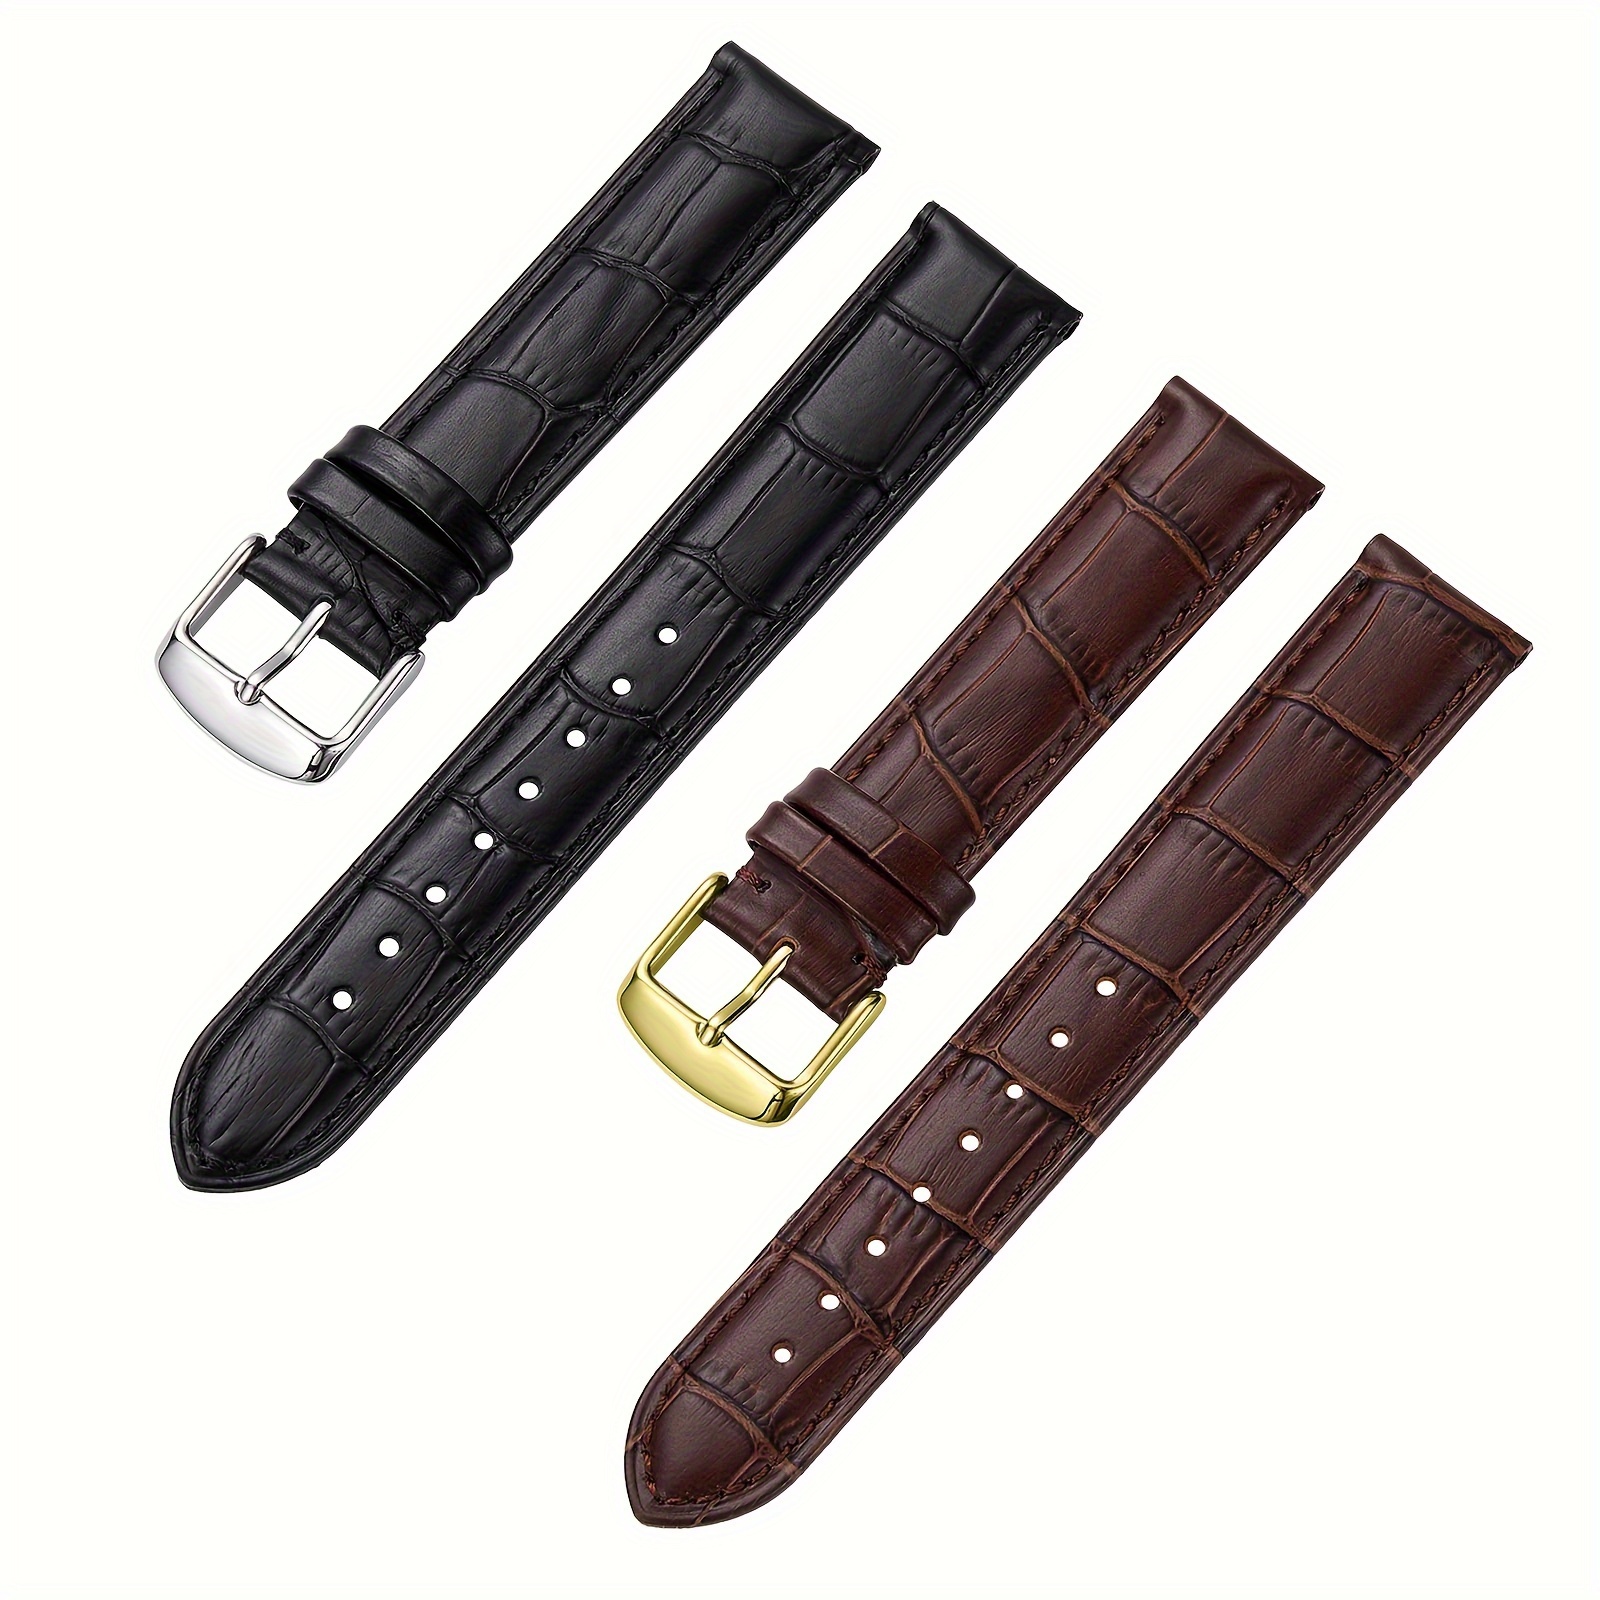 

Genuine Leather Cowhide Straps 16mm 18mm 20mm 22mm 24mm, Stainless Steel Buckle Bracelet For Men Women, Ideal Choice For Gifts